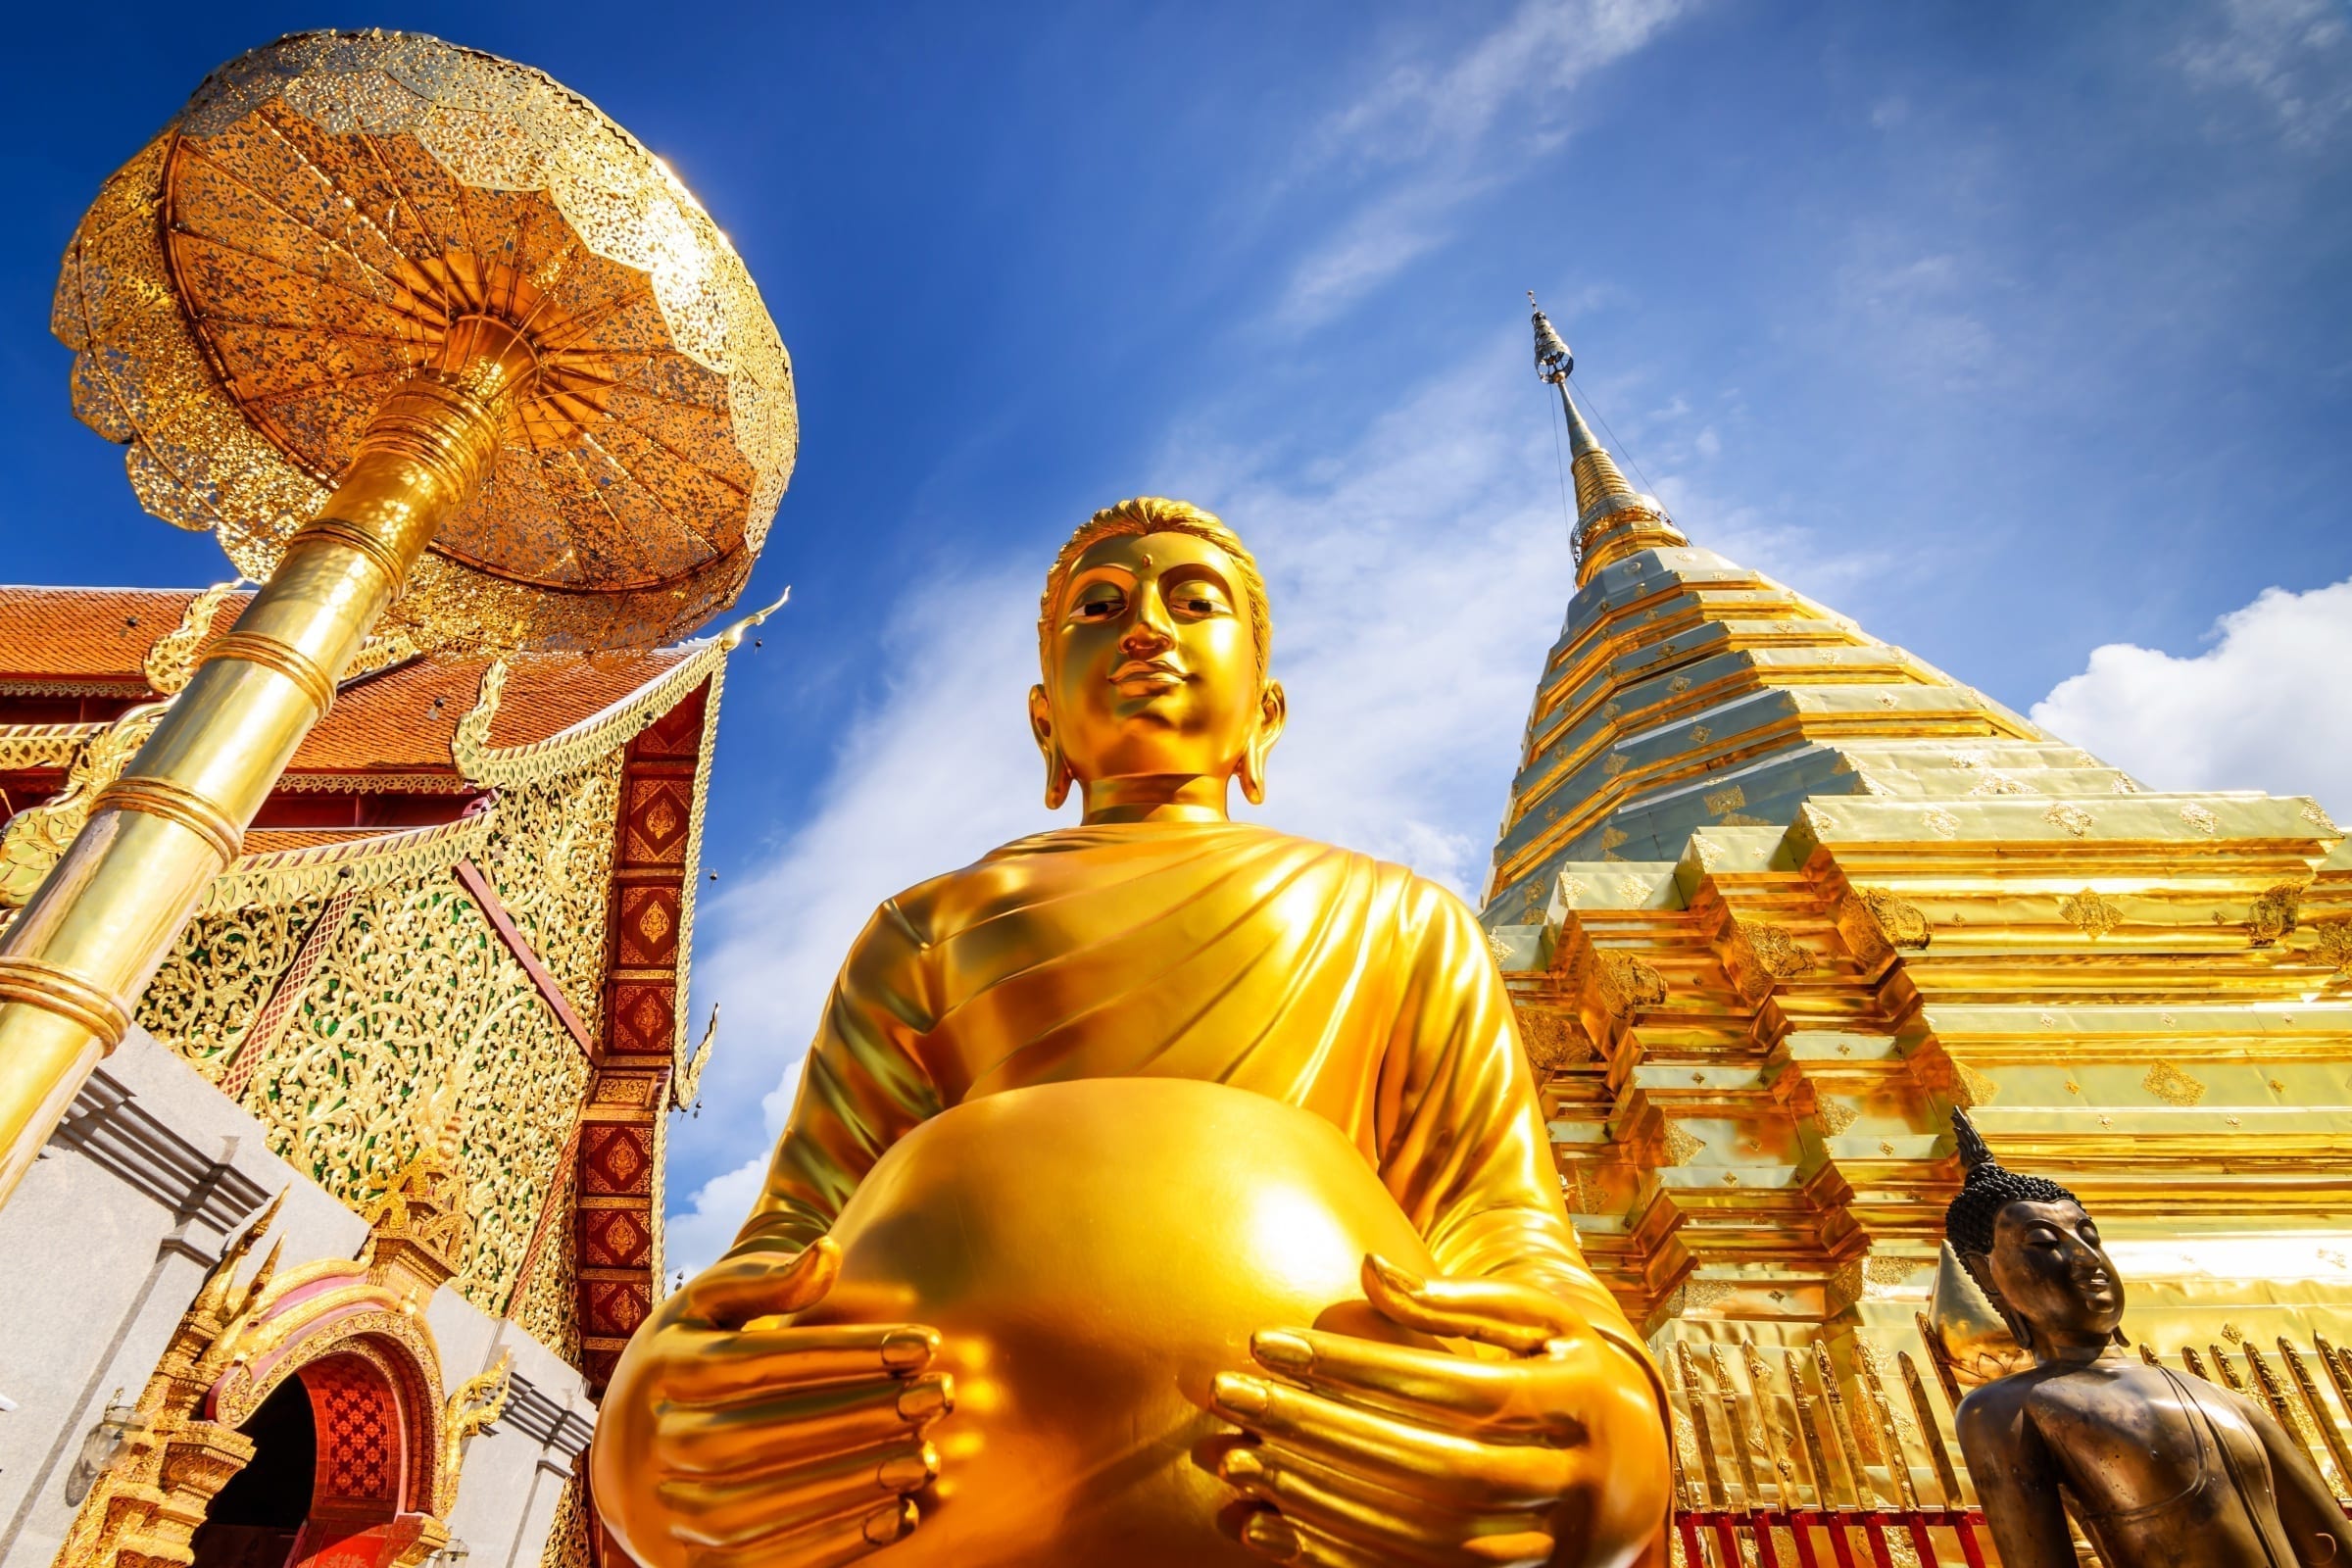 Chiang Mai Wat phra That Doi Suthep buhda golden, included in tours offered by Asia Vacation Group